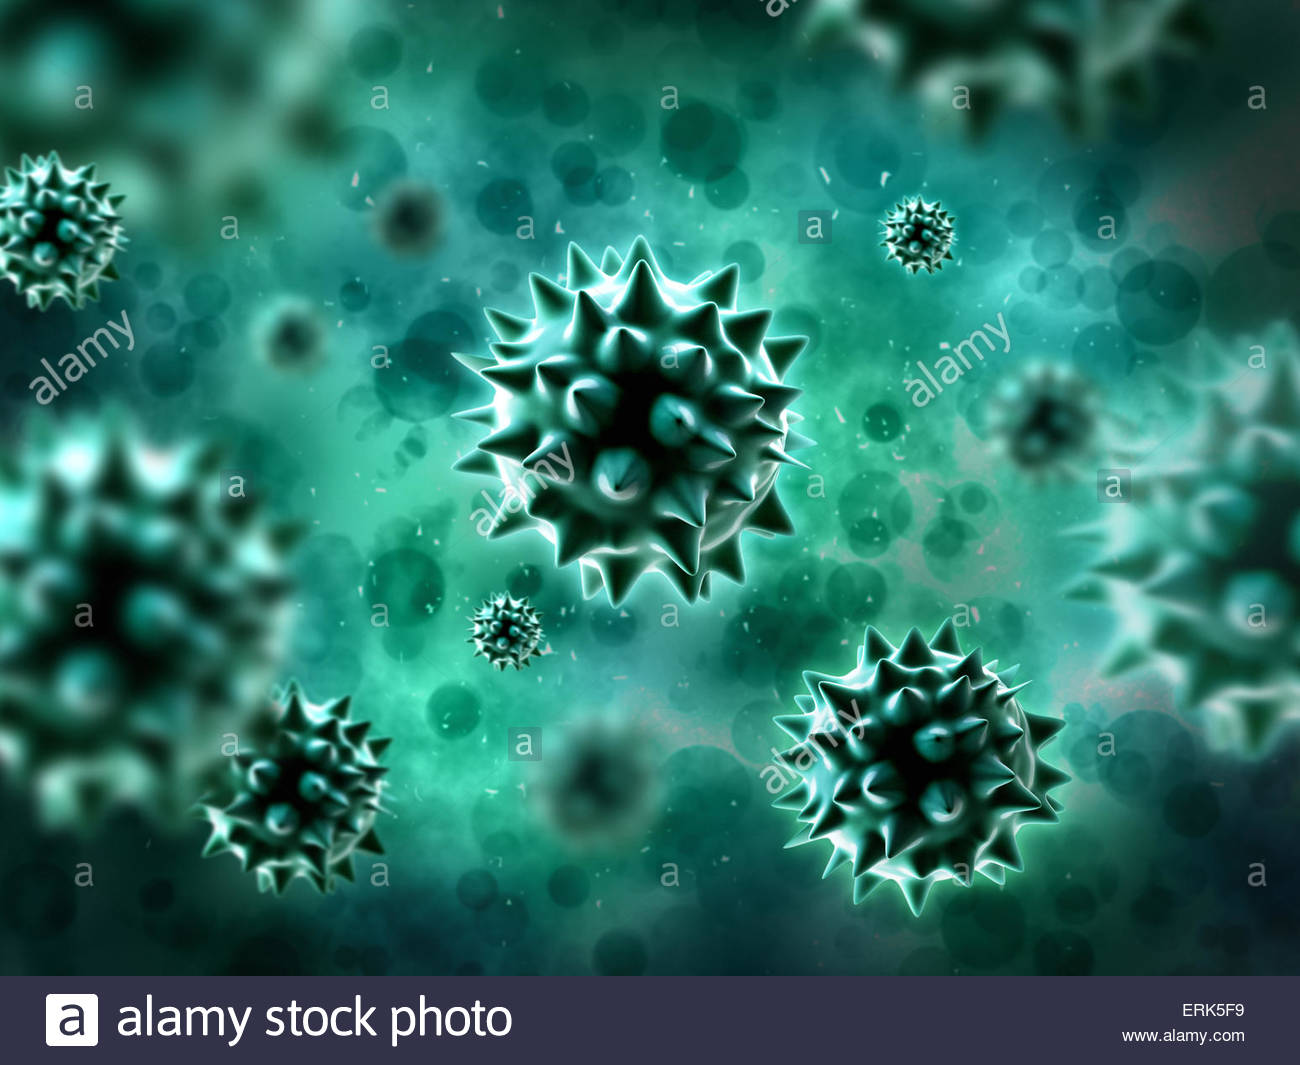 Green Blue Bacteria 3d Rendering Background Stock Photo